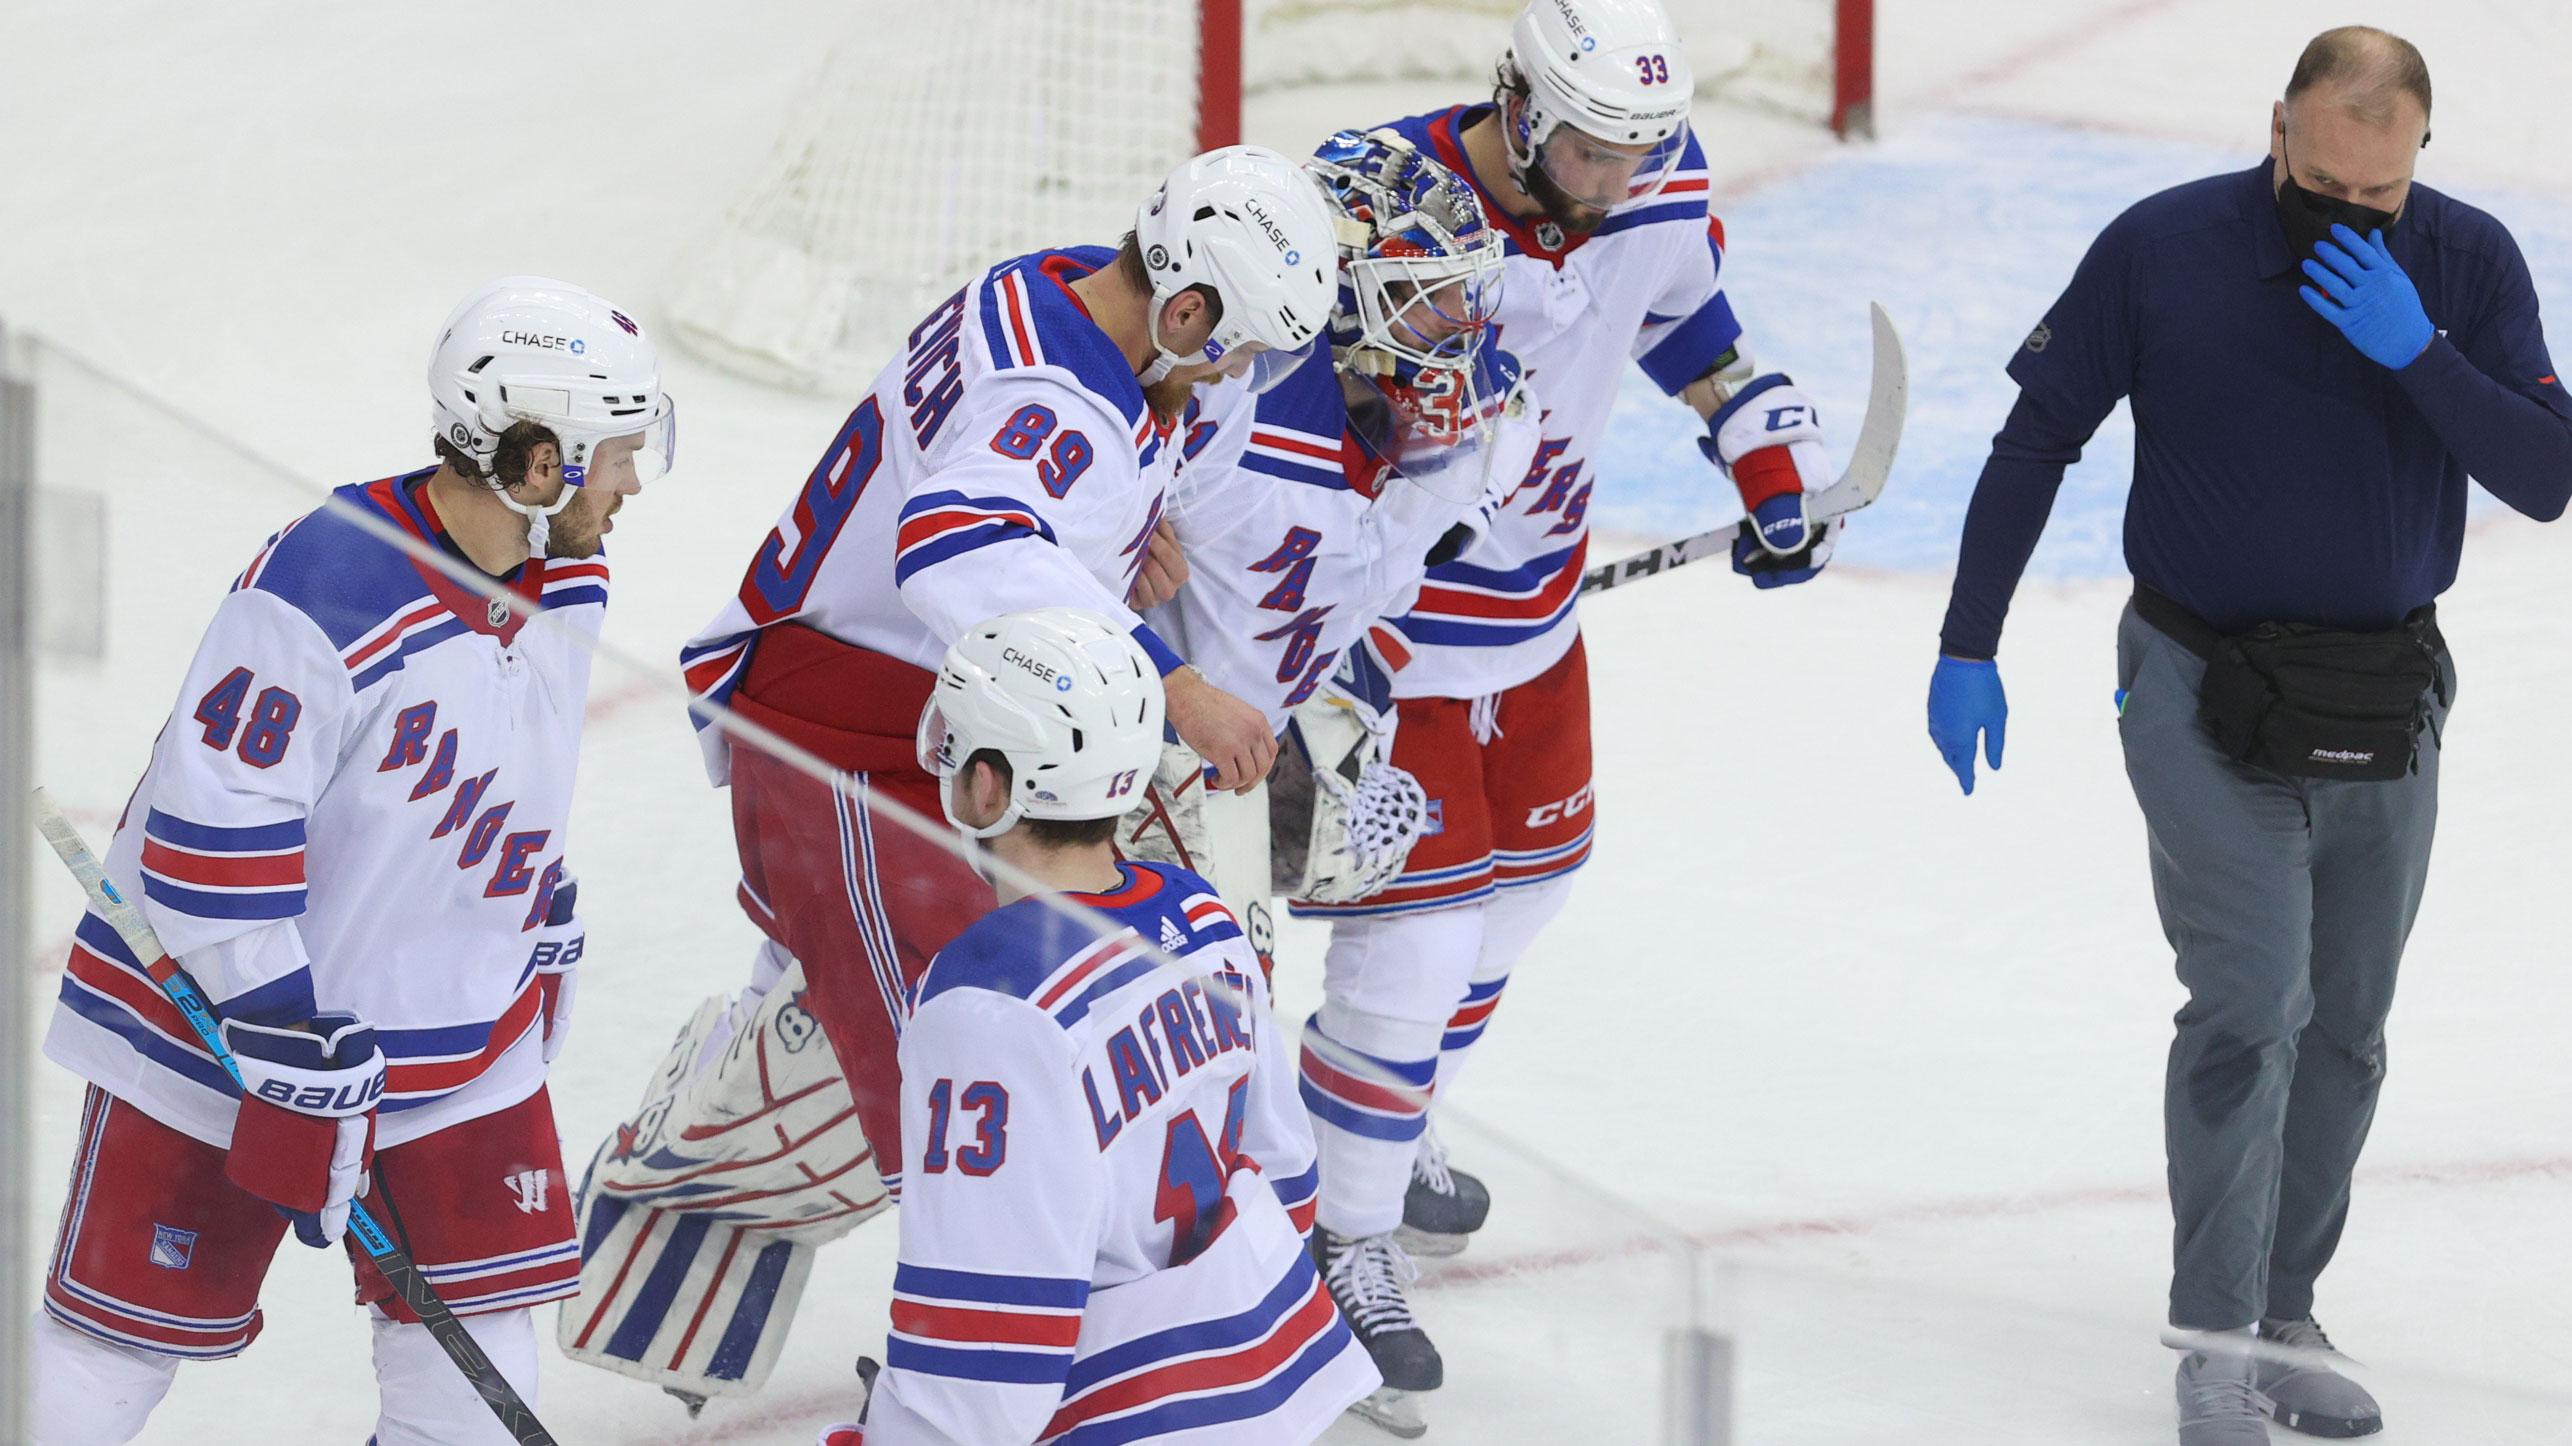 Mar 4, 2021; Newark, New Jersey, USA; New York Rangers goaltender Igor Shesterkin (31) is helped off the ice during the third period of their game against the New Jersey Devils at Prudential Center. / Ed Mulholland-USA TODAY Sports